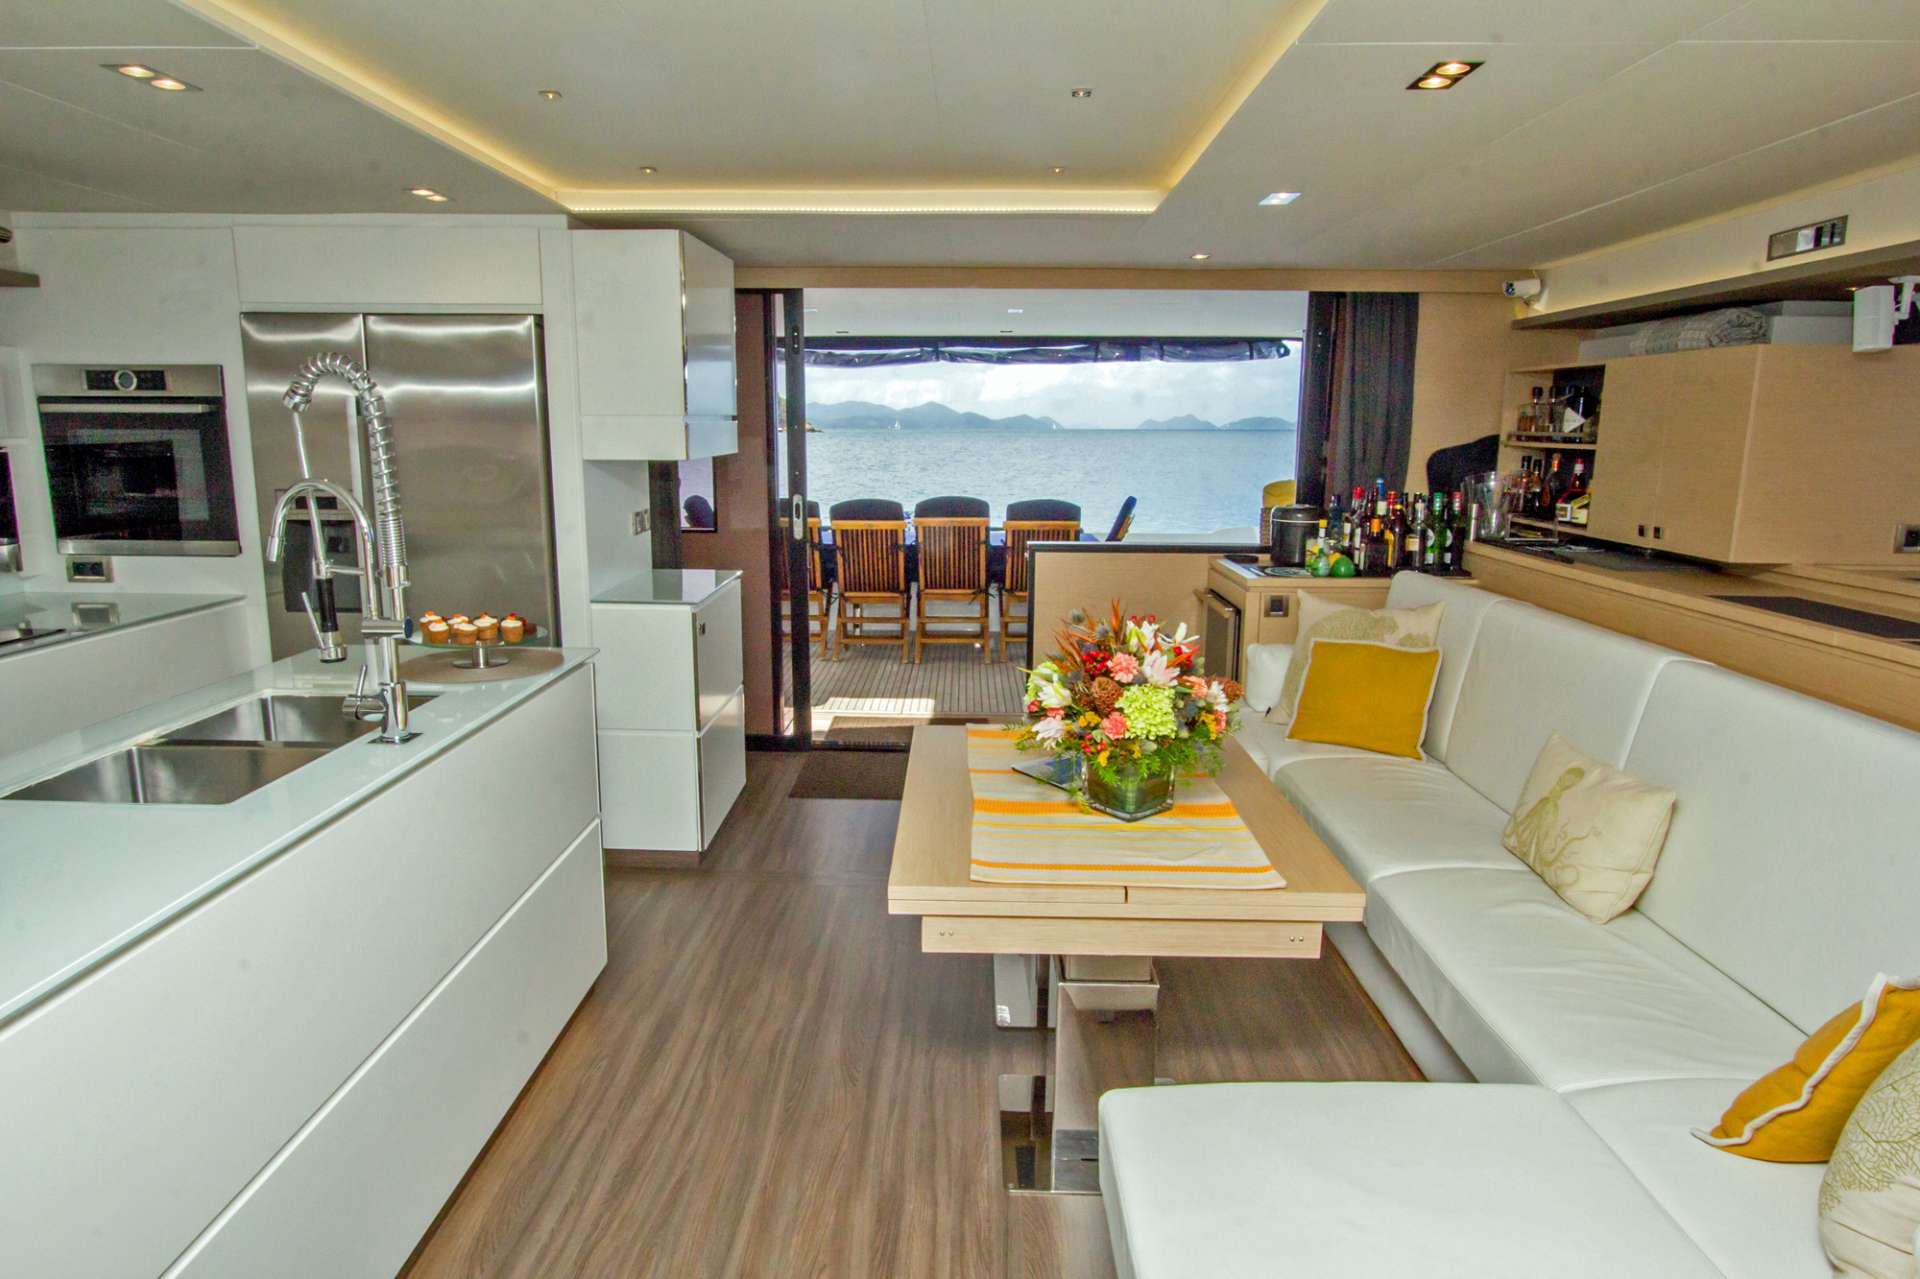 Catamaran Yacht 'NENNE' Gorgeous Main Salon & Open Galley, 10 PAX, 3 Crew, 67.00 Ft, 20.00 Meters, Built 2017, Fountaine Pajot, Refit Year The latest, 2020 electronics and equipment onboard. New larger tender June 2019